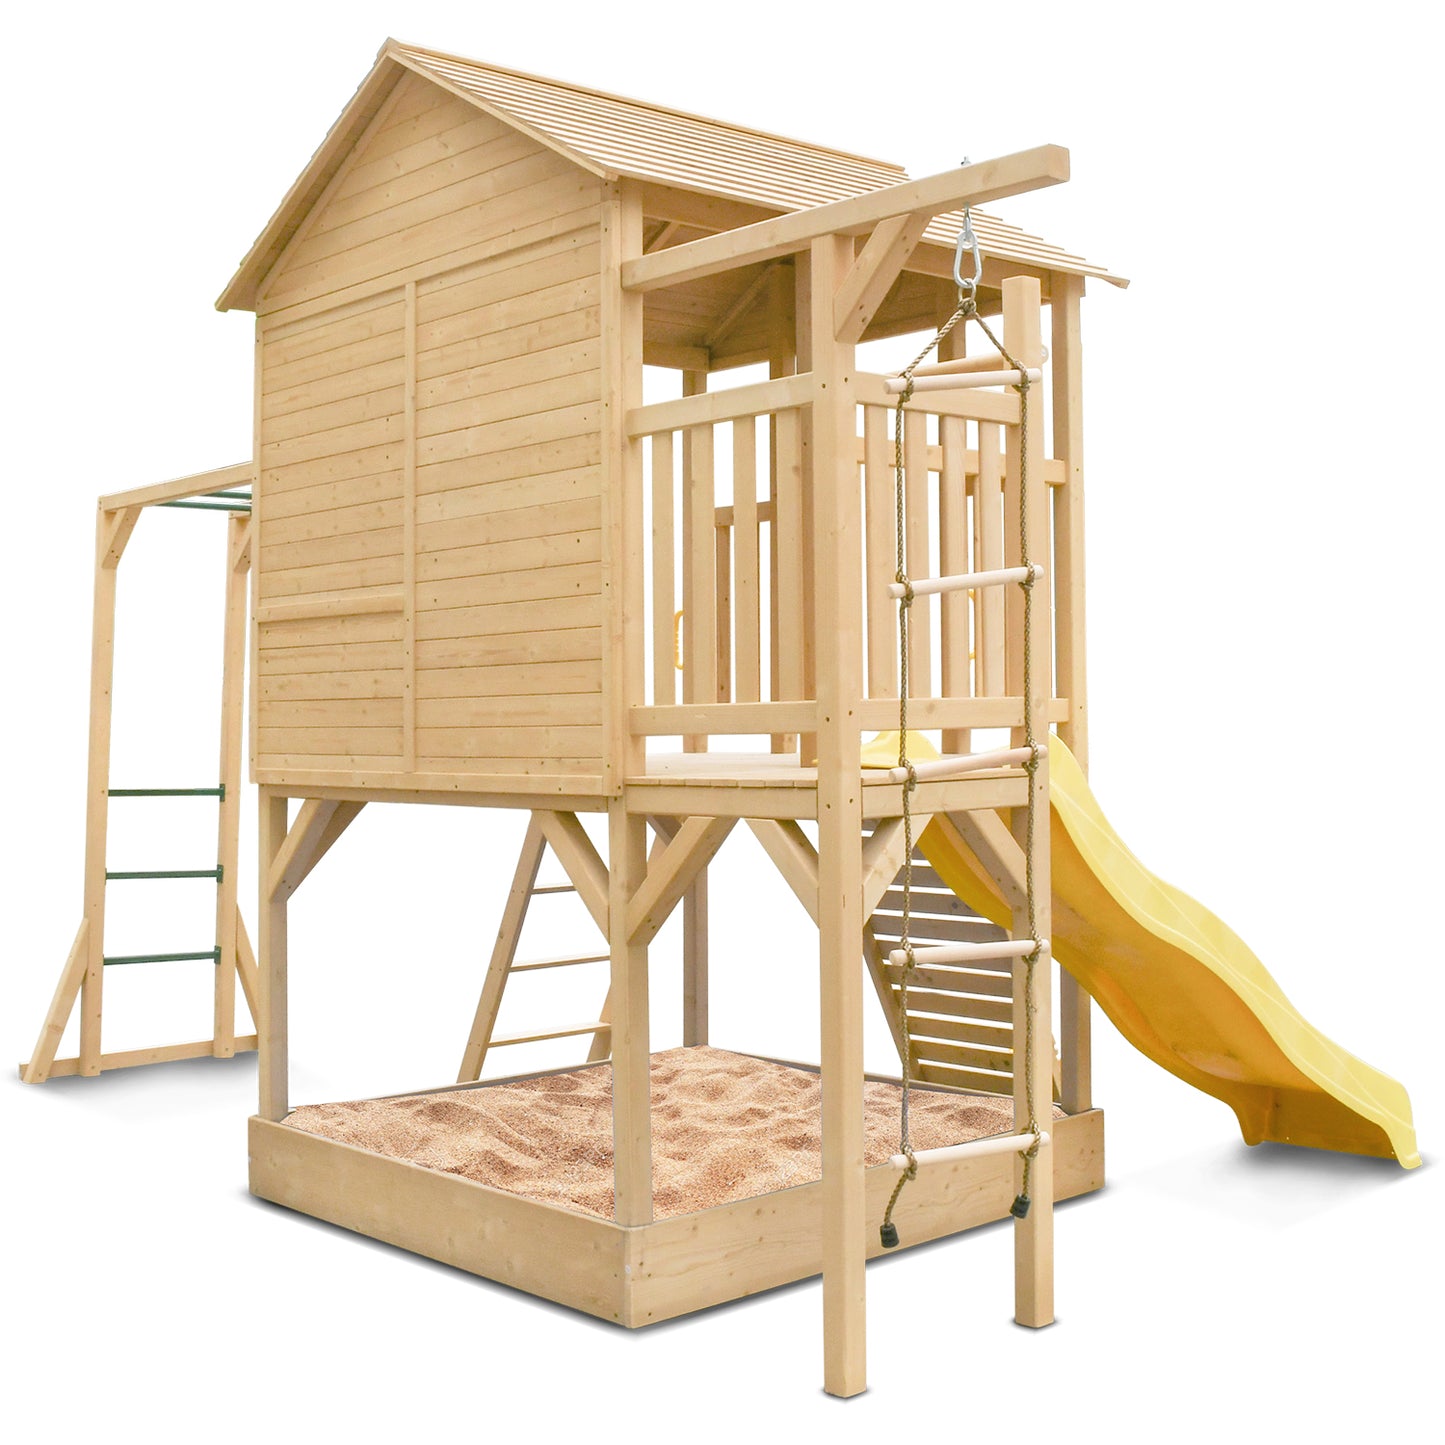 Lifespan Kids Kingston Cubby House with 2.2m Yellow Slide